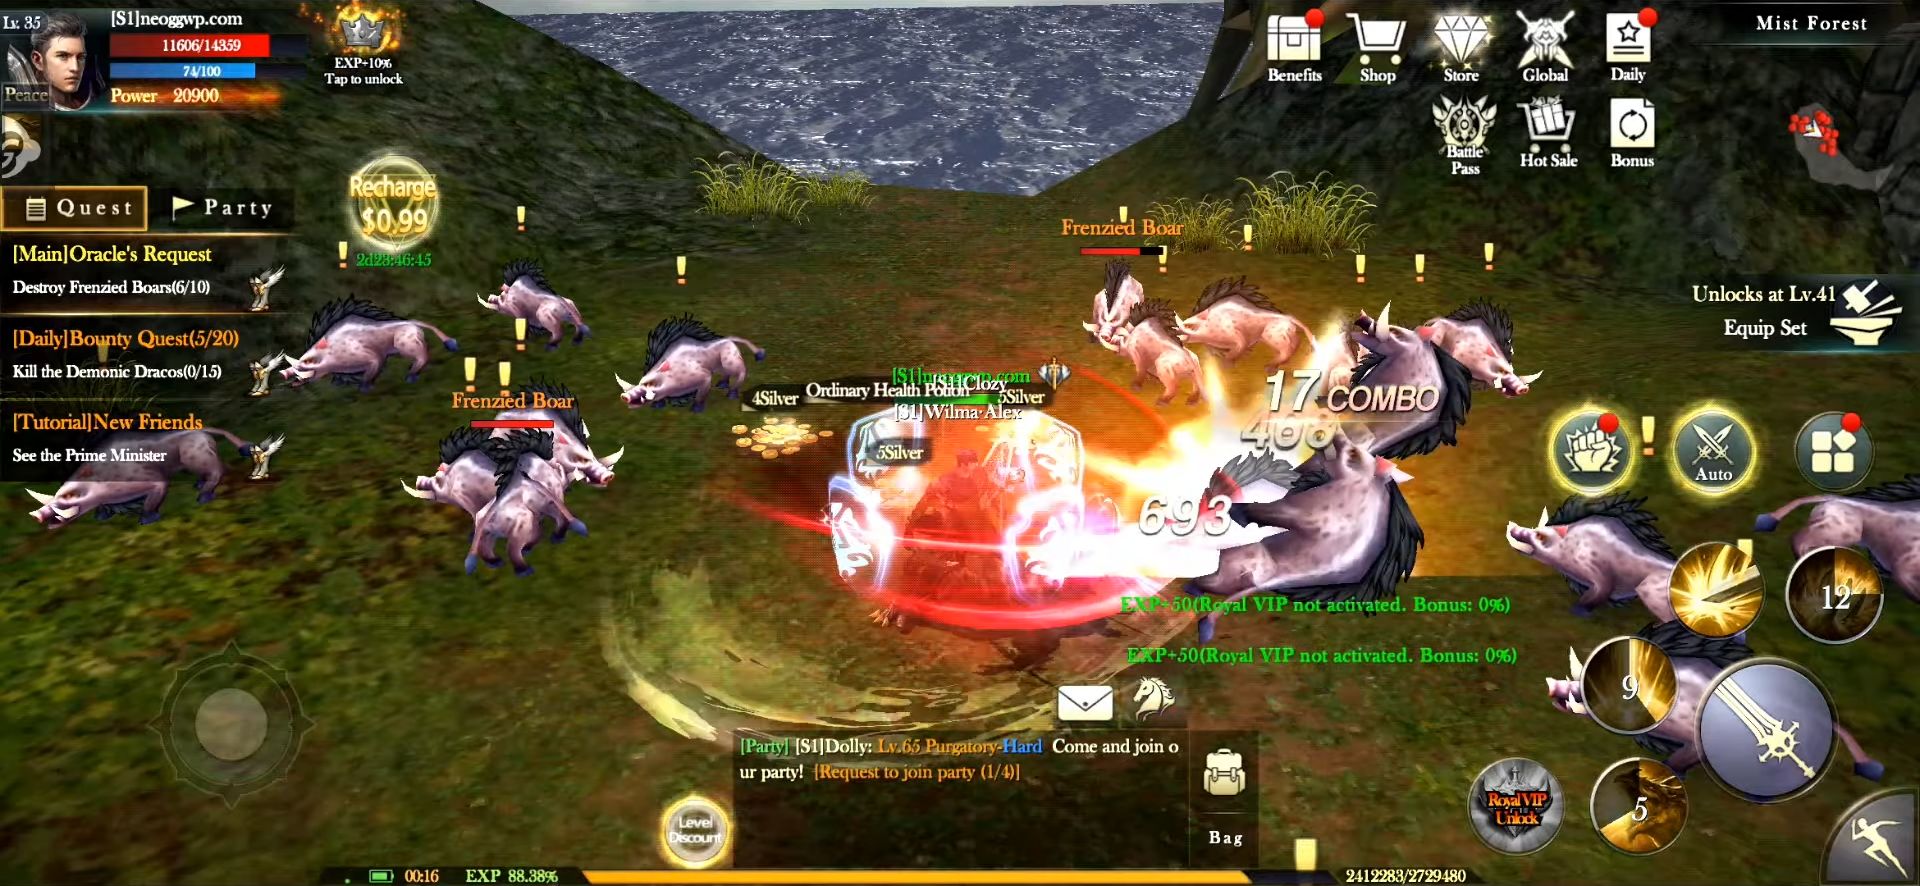 Gameplay of the Elysium Lost for Android phone or tablet.